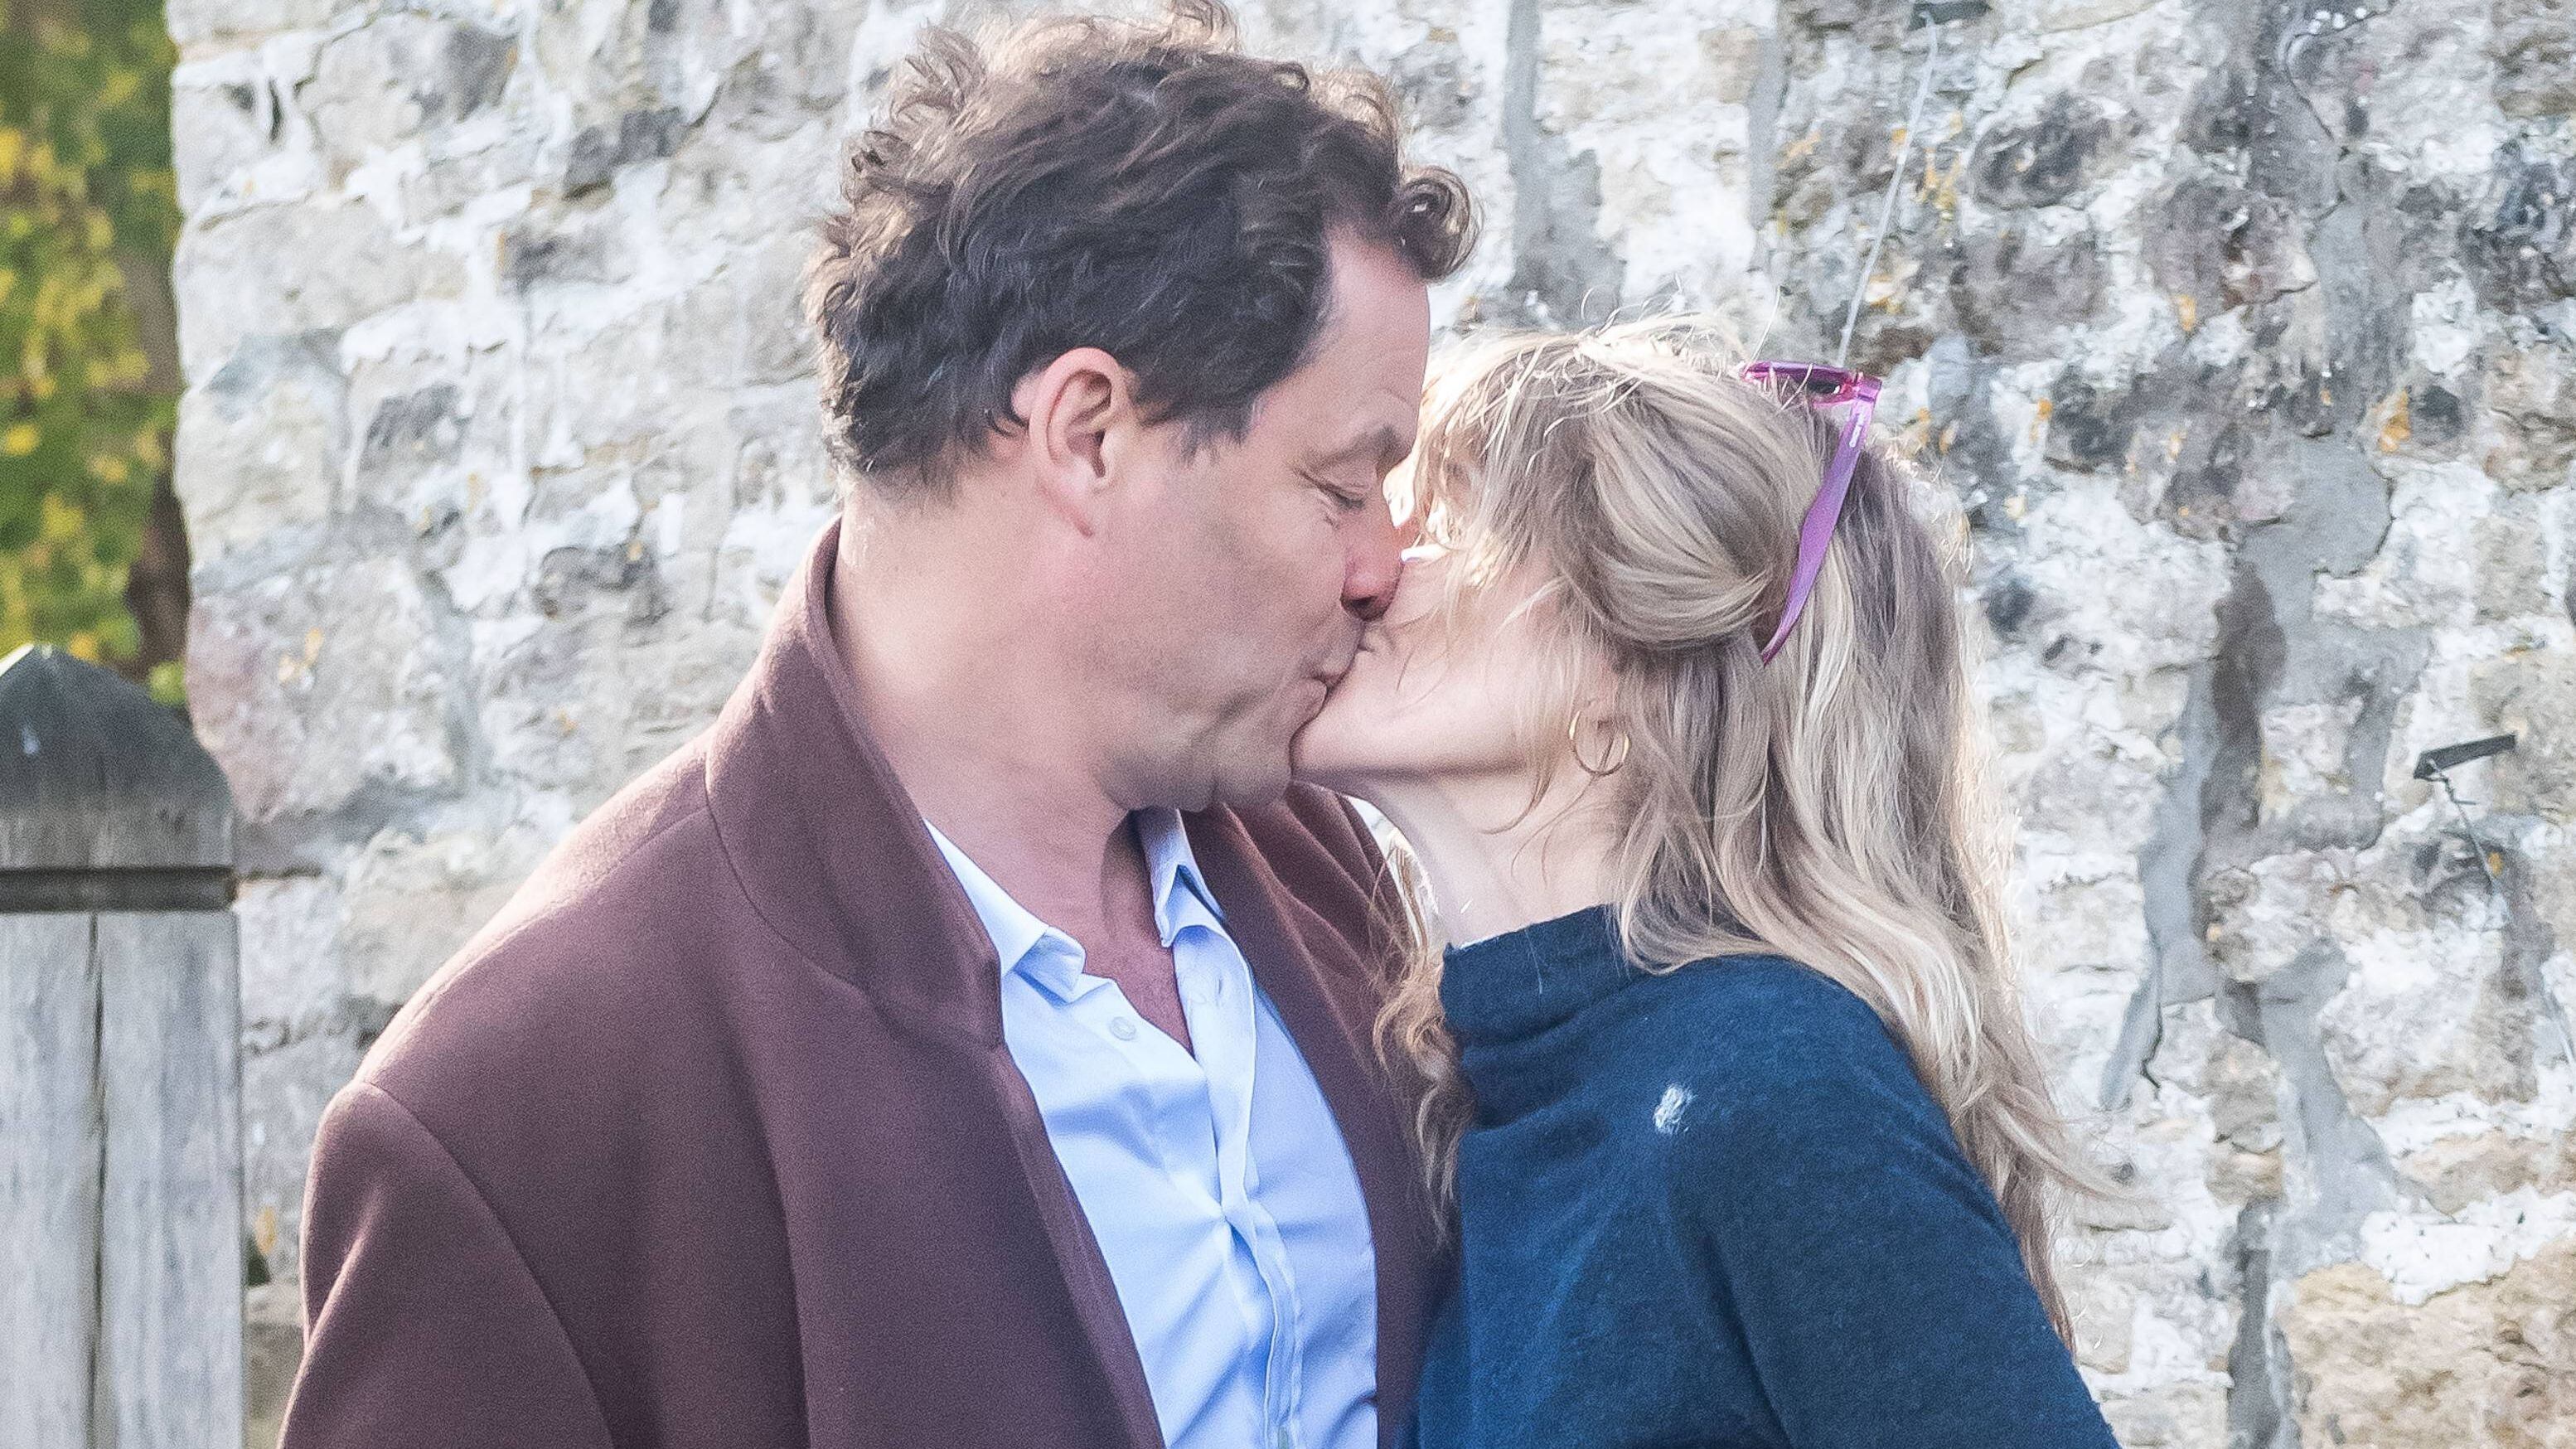 COTSWOLDS, ENGLAND - OCTOBER 13: Dominic West and wife Catherine FitzGerald make a statement to press outside their Cotswolds home after Dominic was seen kissing actress Lily James whilst in Rome on October 13, 2020 in Cotswolds, England. (Photo by GlosPics/MEGA/GC Images)